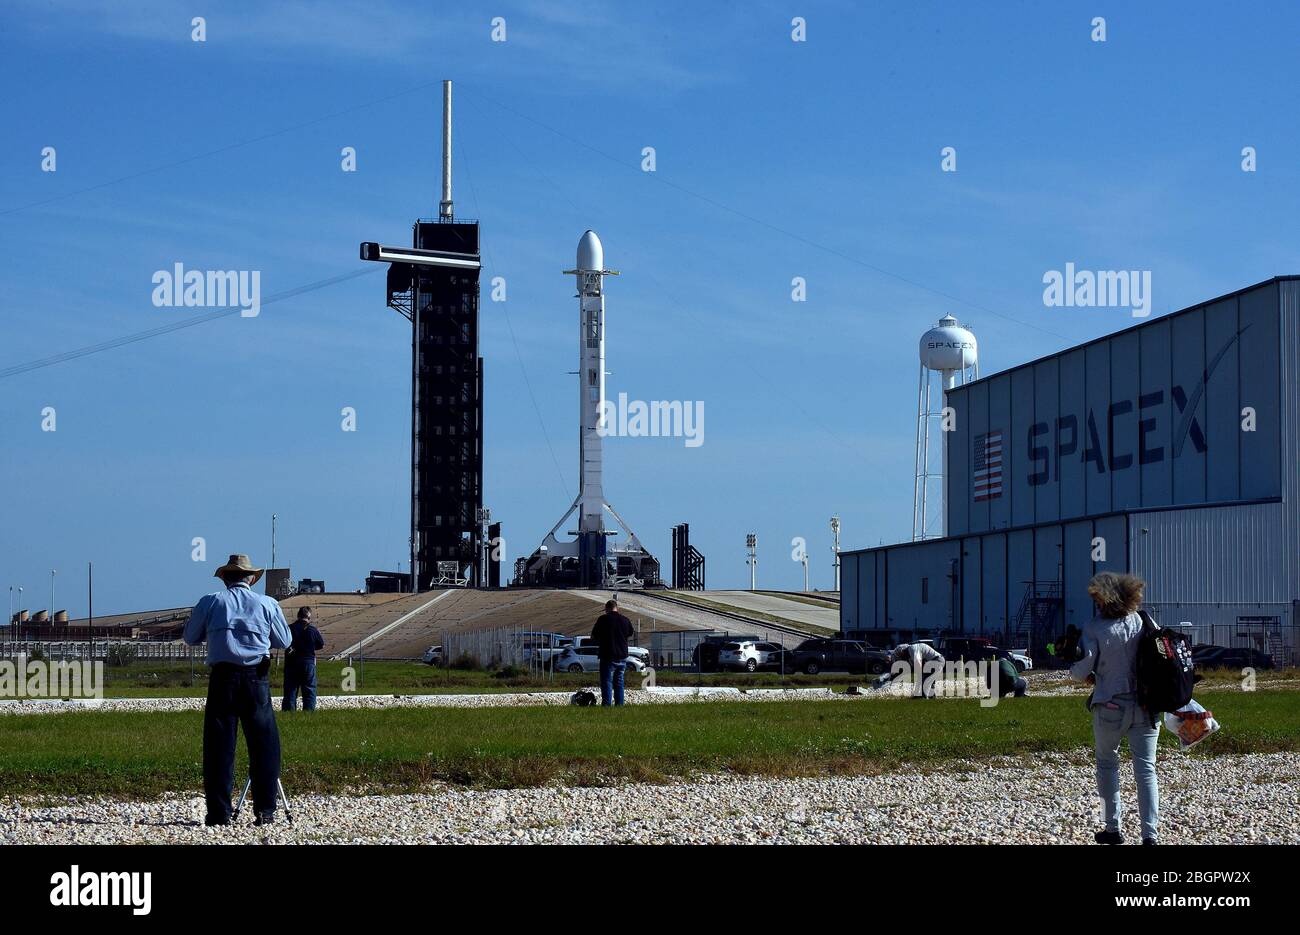 April 22, 2020 - Kennedy Space Center, Florida, United States - A SpaceX Falcon 9 rocket carrying the seventh batch of 60 Starlink satellites which will provide global internet service stands ready for launch on April 22, 2020 at pad 39A at the Kennedy Space Center in Florida. (Paul Hennessy/Alamy) Credit: Paul Hennessy/Alamy Live News Stock Photo